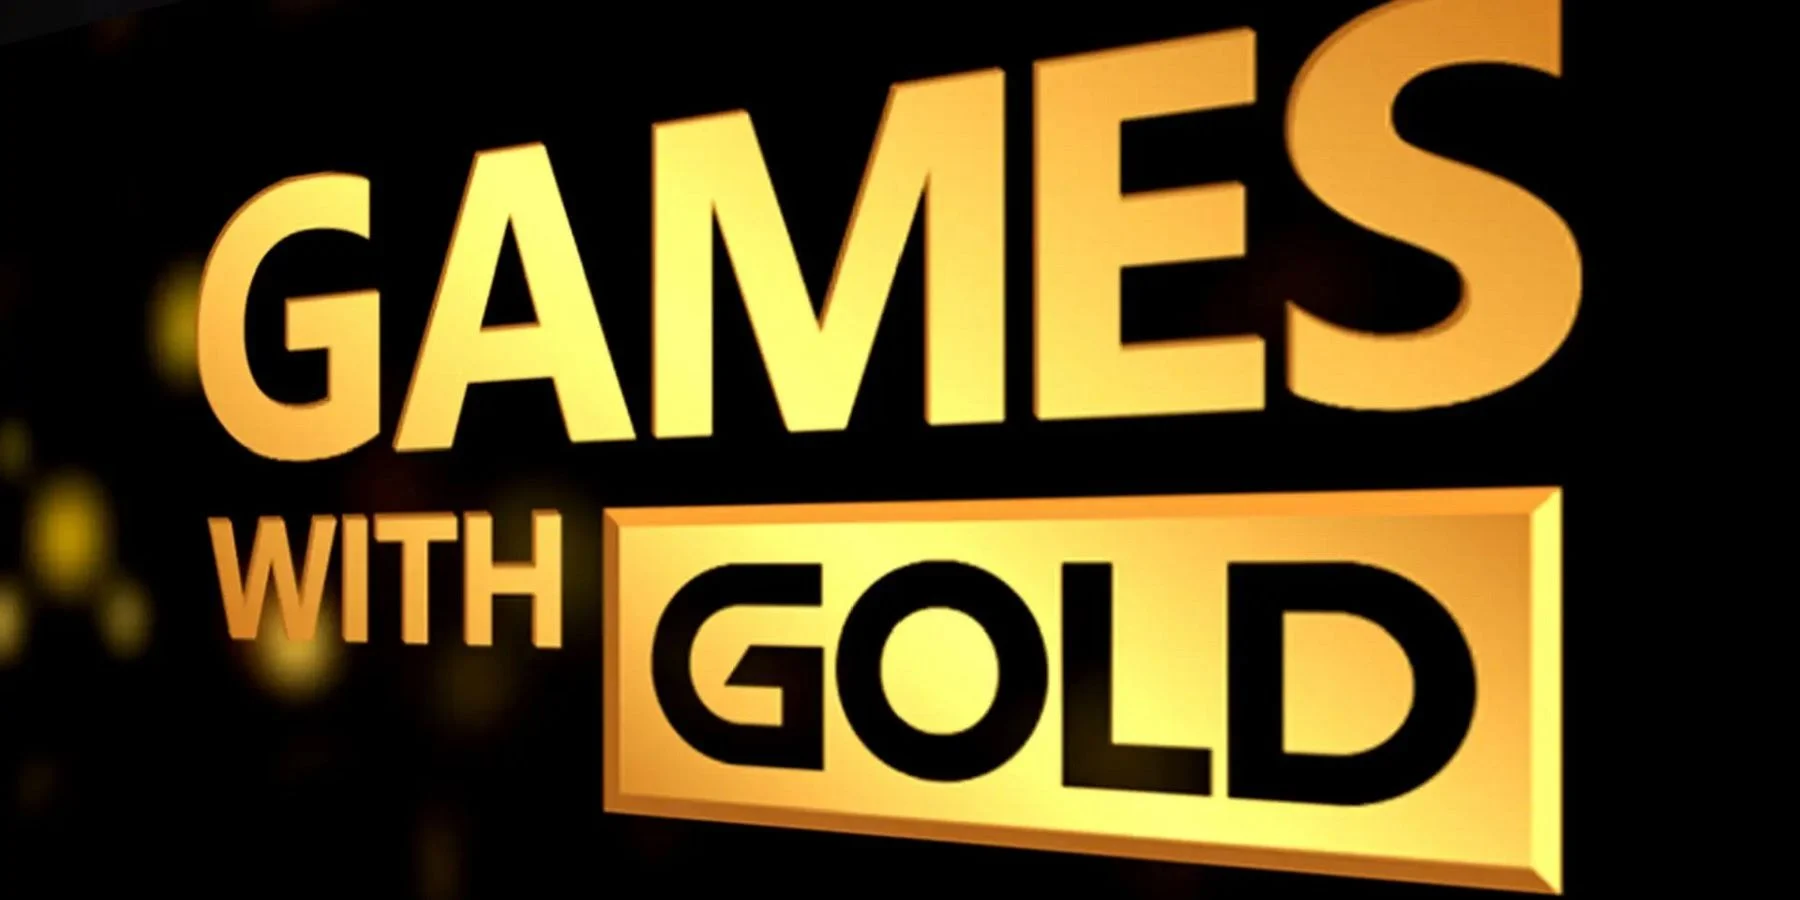 September 2021 xbox games with gold games have been announced!